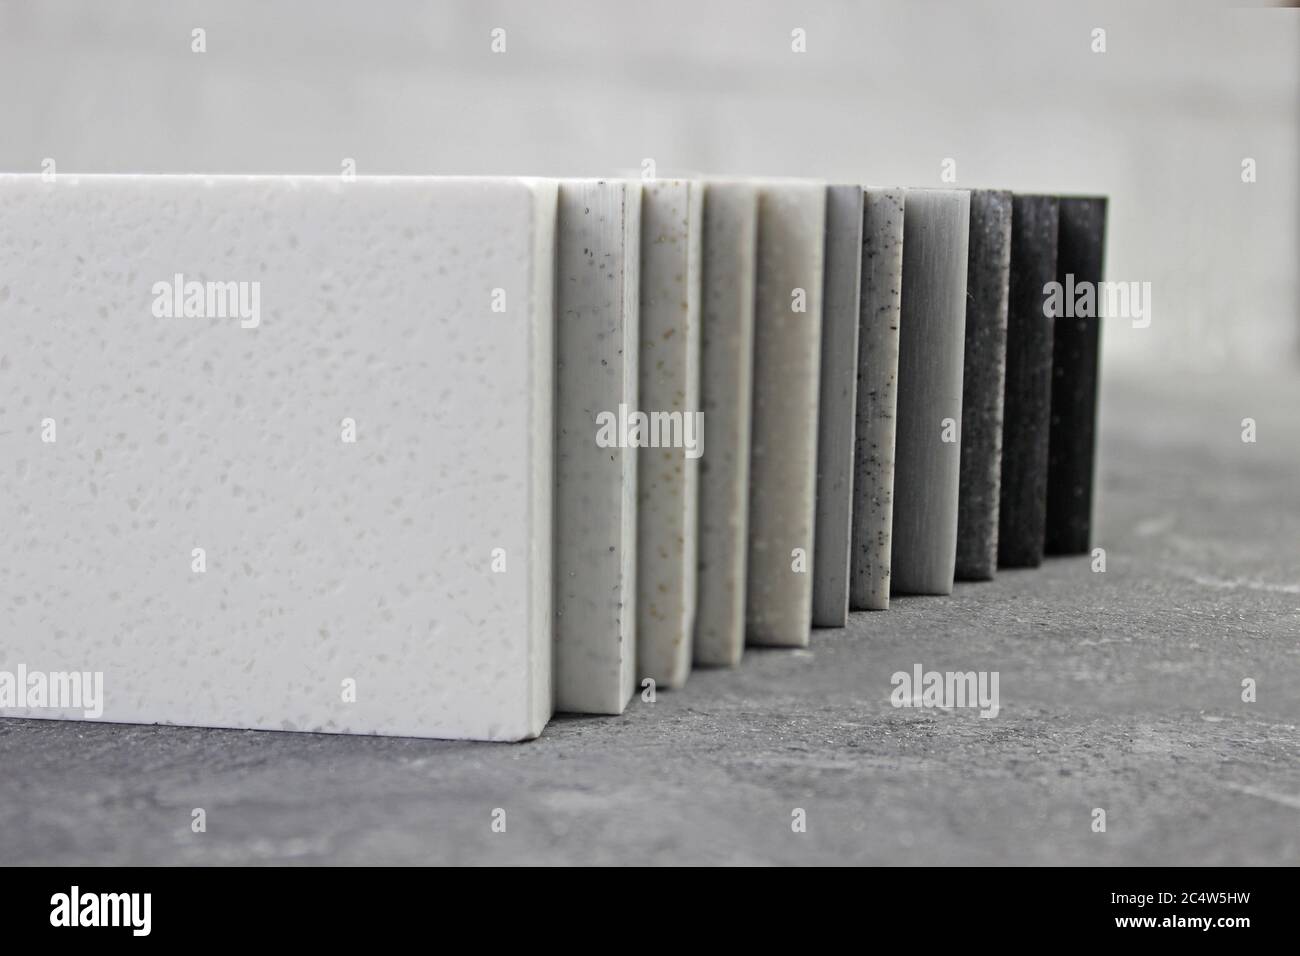 Luxury marble natural stone slabs for kitchen countertops and floor tiles. Samples of stone for countertops. Stock Photo